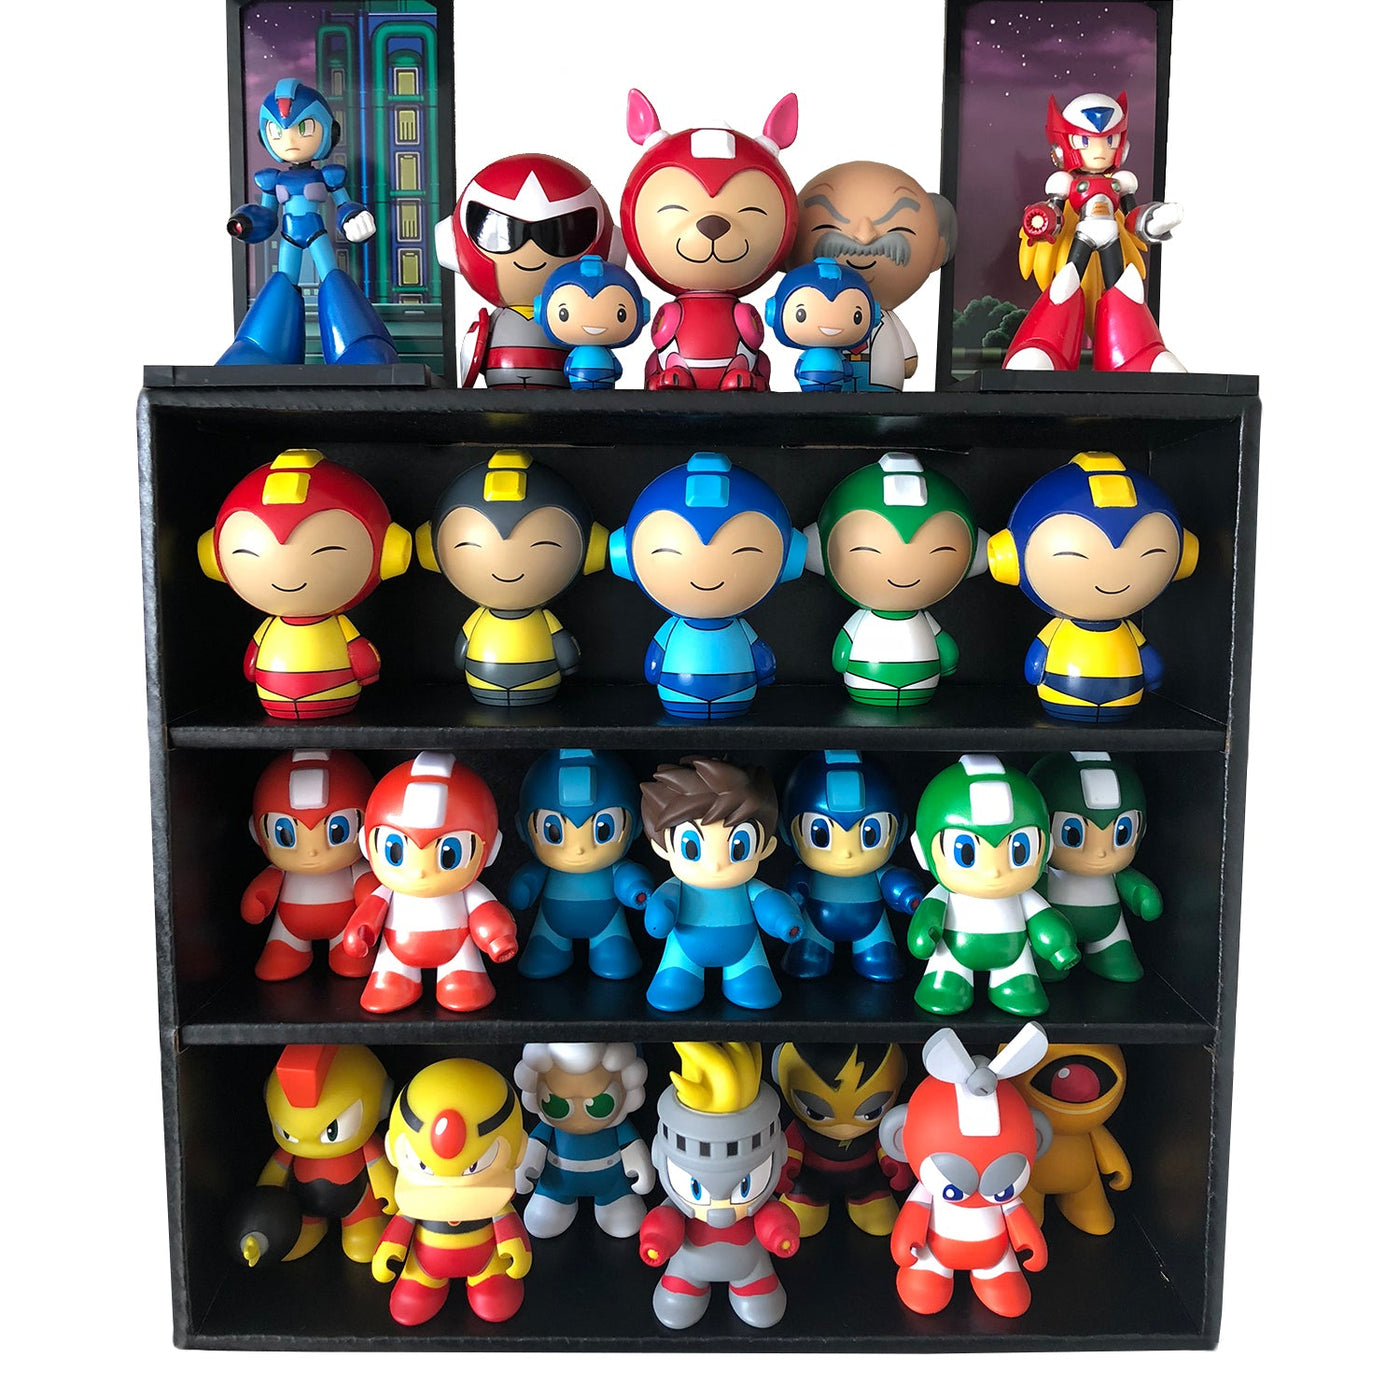 MINI - Black Display Case for Small Toys, Wall Mountable & Stackable, Corrugated Cardboard - Display Geek